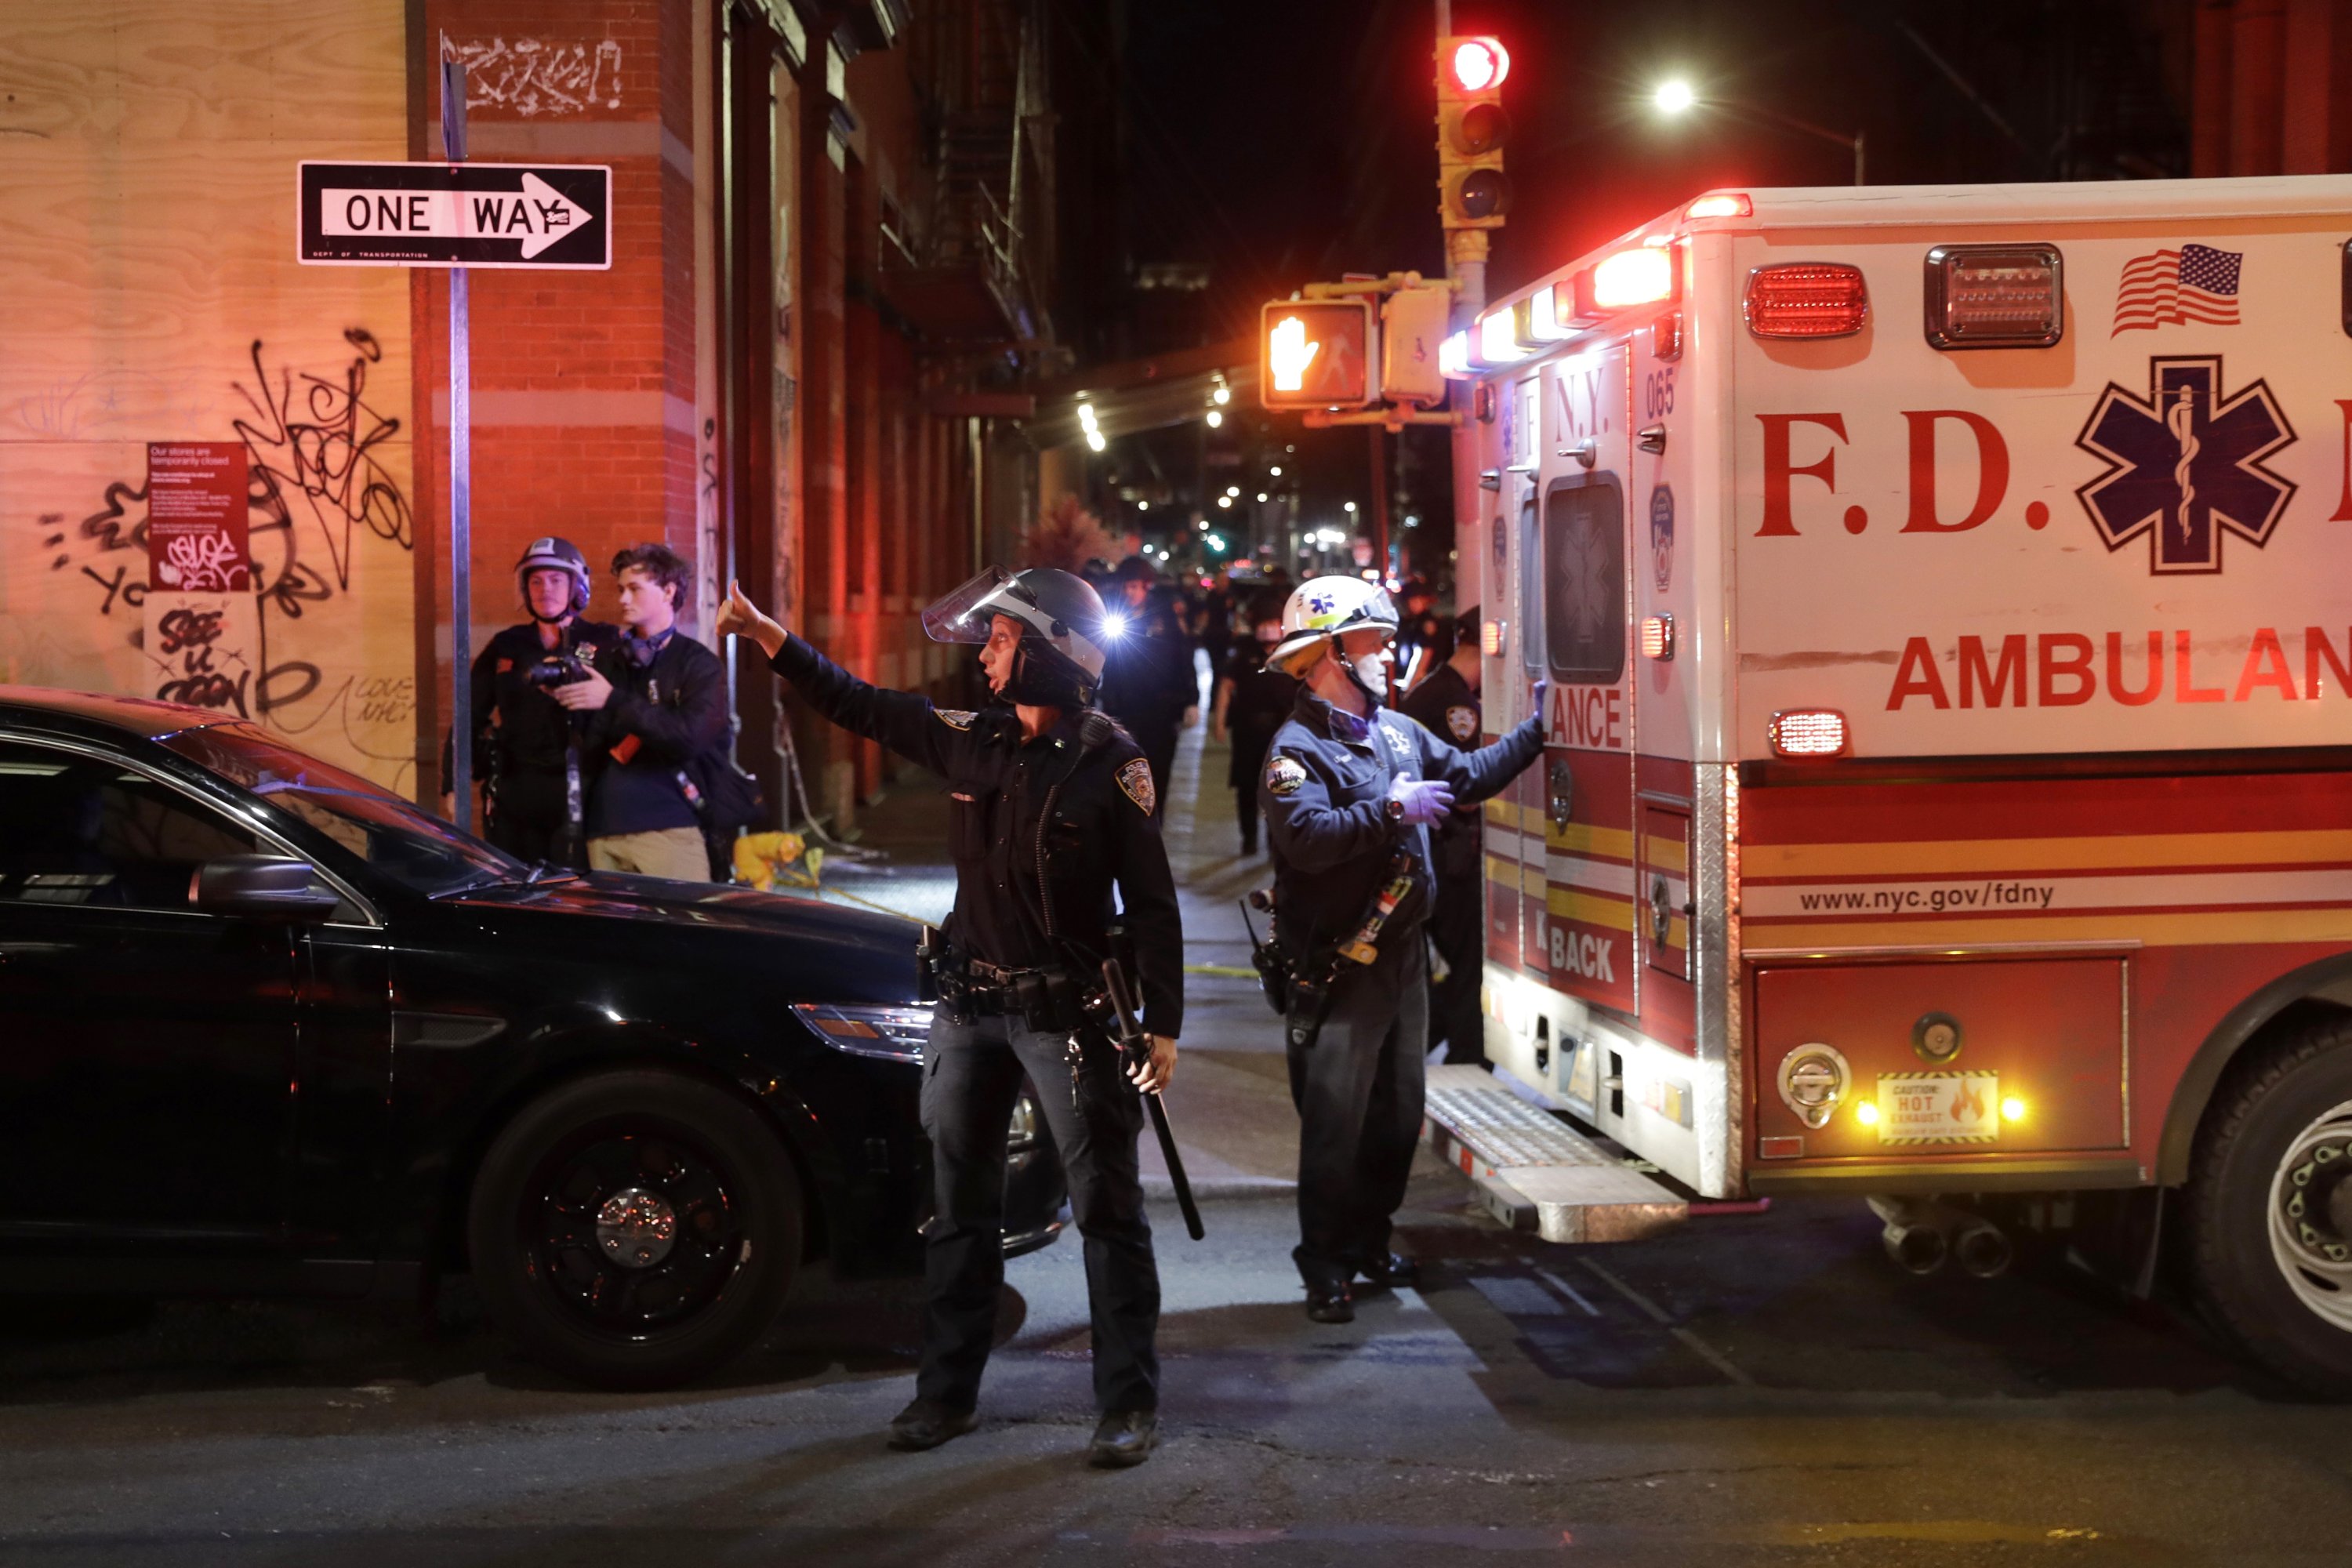 First responders work at the scene of a shooting in New York, Monday, June 1, 2020. (AP Photo)